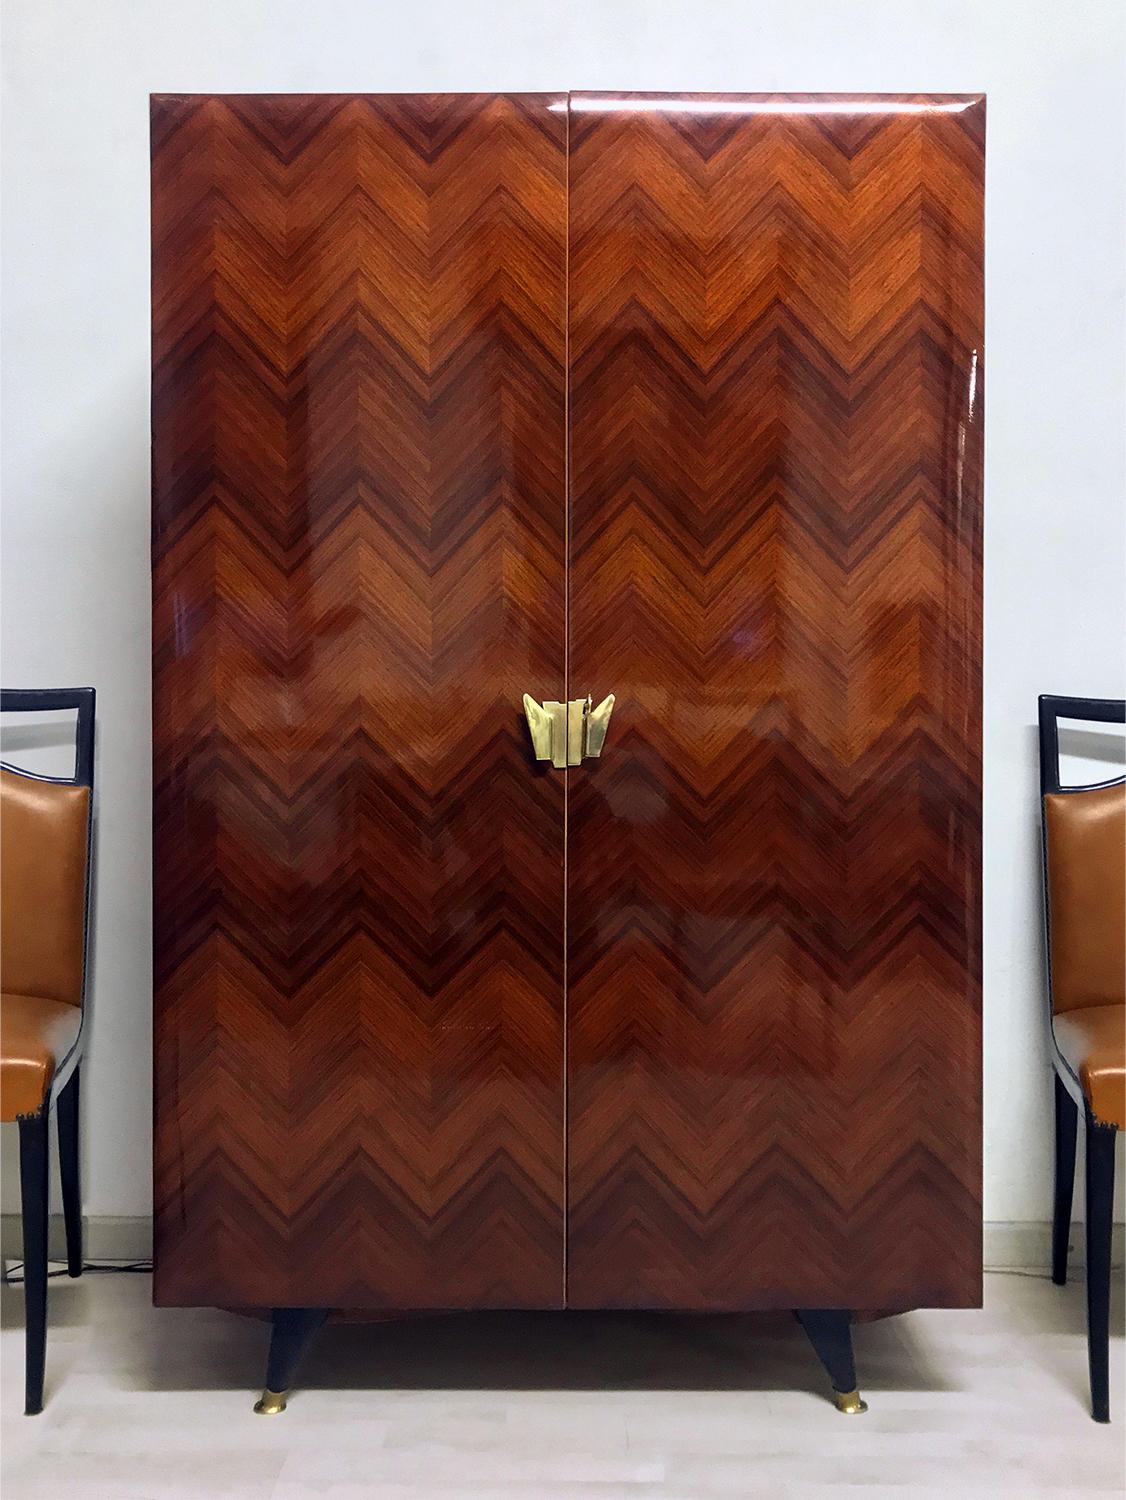 Rare version for this stylish Italian Cabinet 2 doors of the 1950s, attributed to La Permanente Mobili Cantù.
The cabinet is made of a gorgeous lacquered teakwood veneer with marquetry in herringbone pattern, and finished with brass